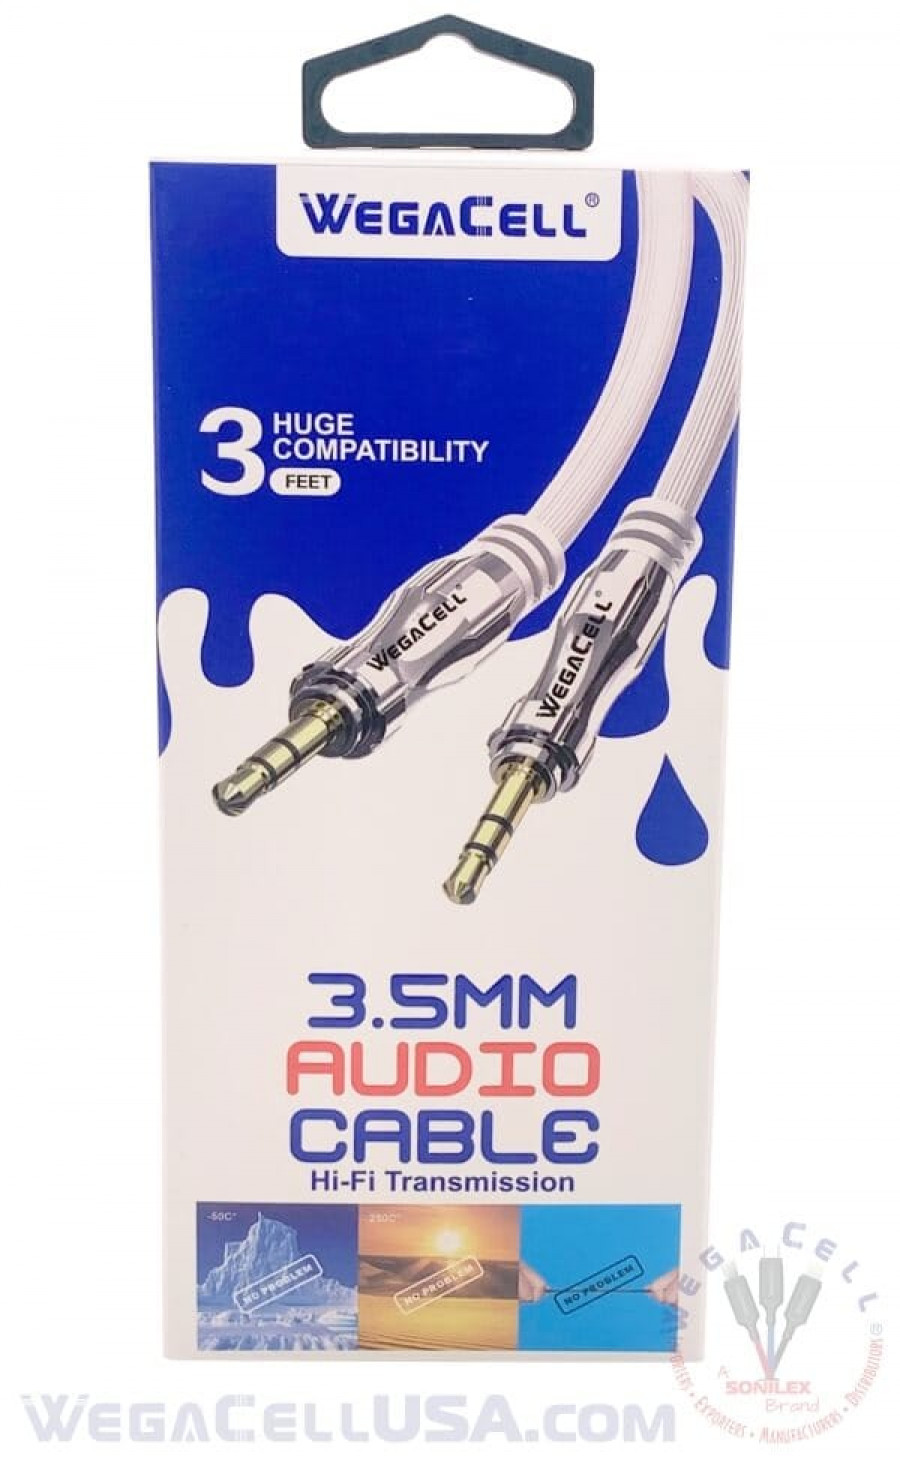 hifi stereo sound braided 3 ft - aux cable - wholesale pkg. wegacell: wl-3ft96-ax aux cable 10